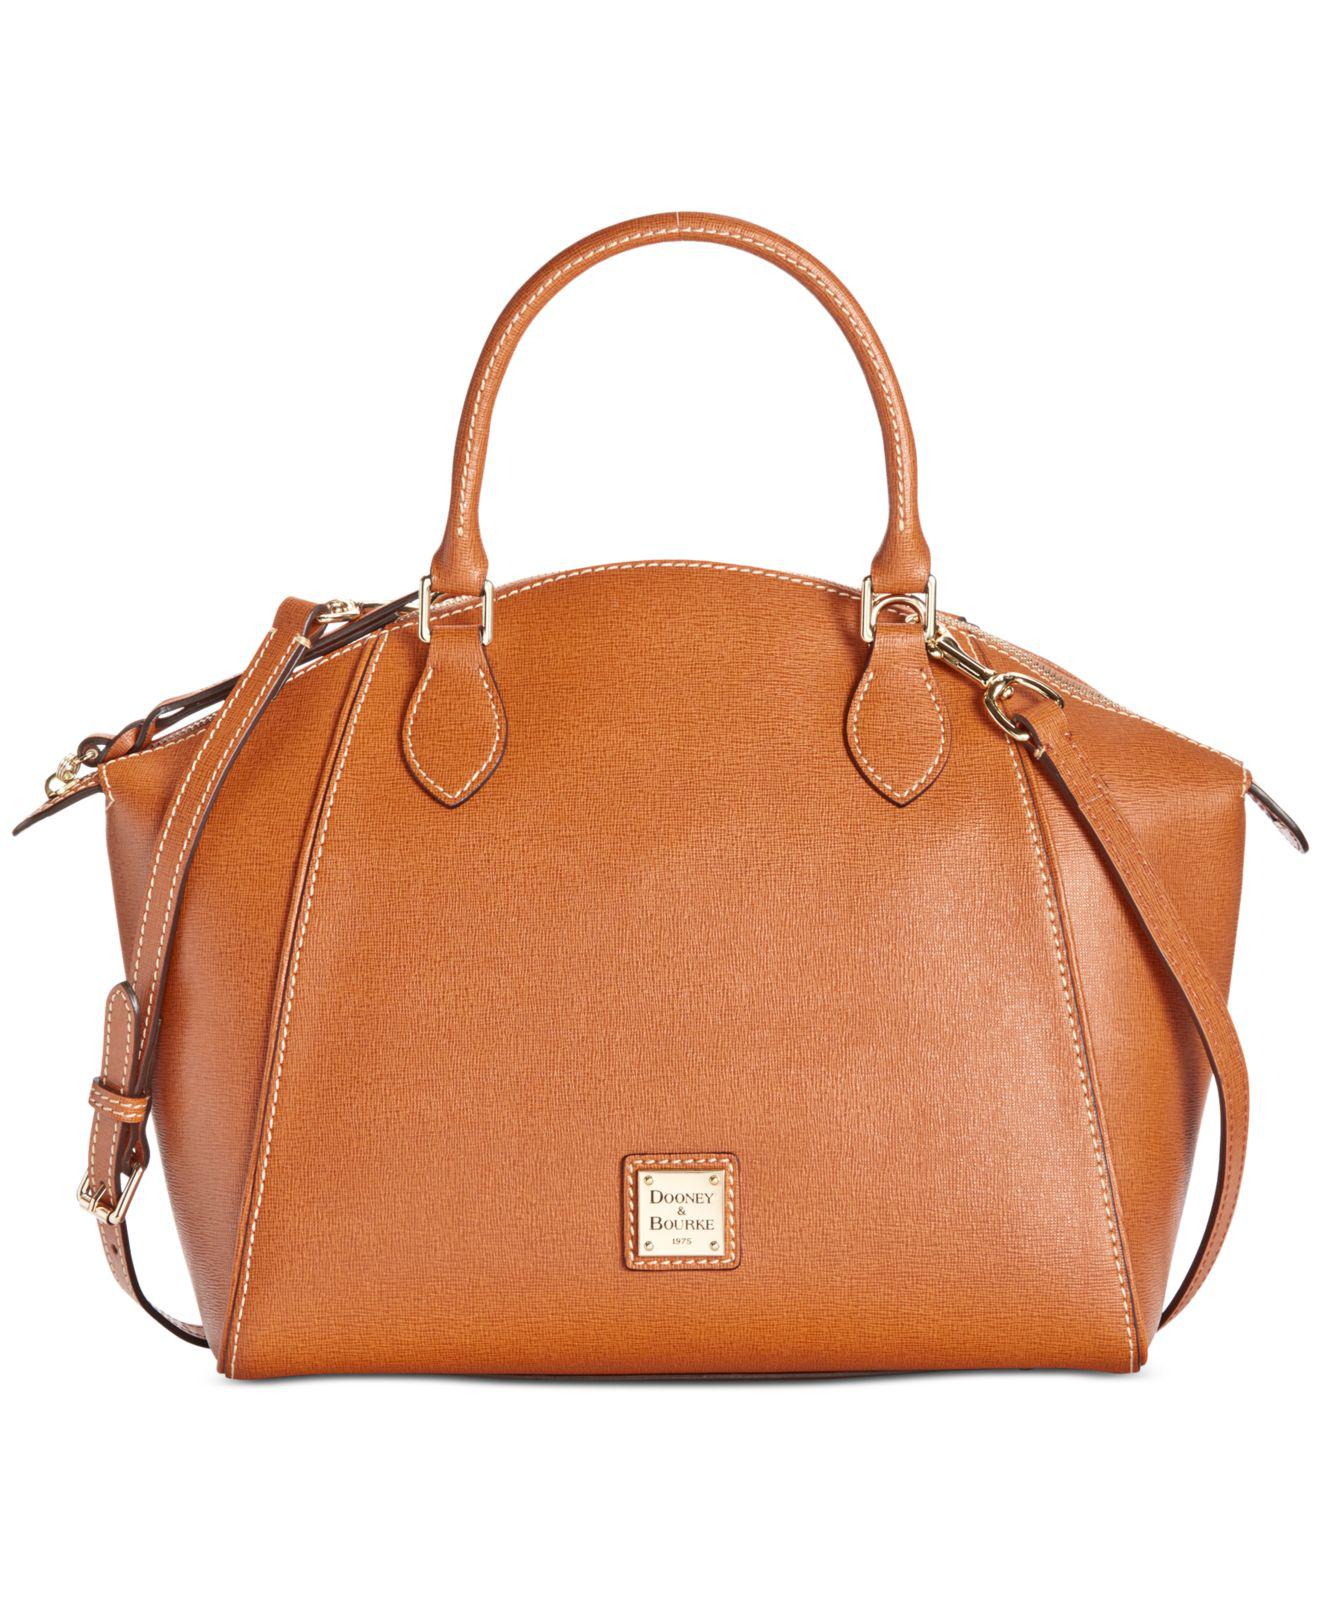 This sleek and practical satchel comes beautifully designed in sturdy Saffi...